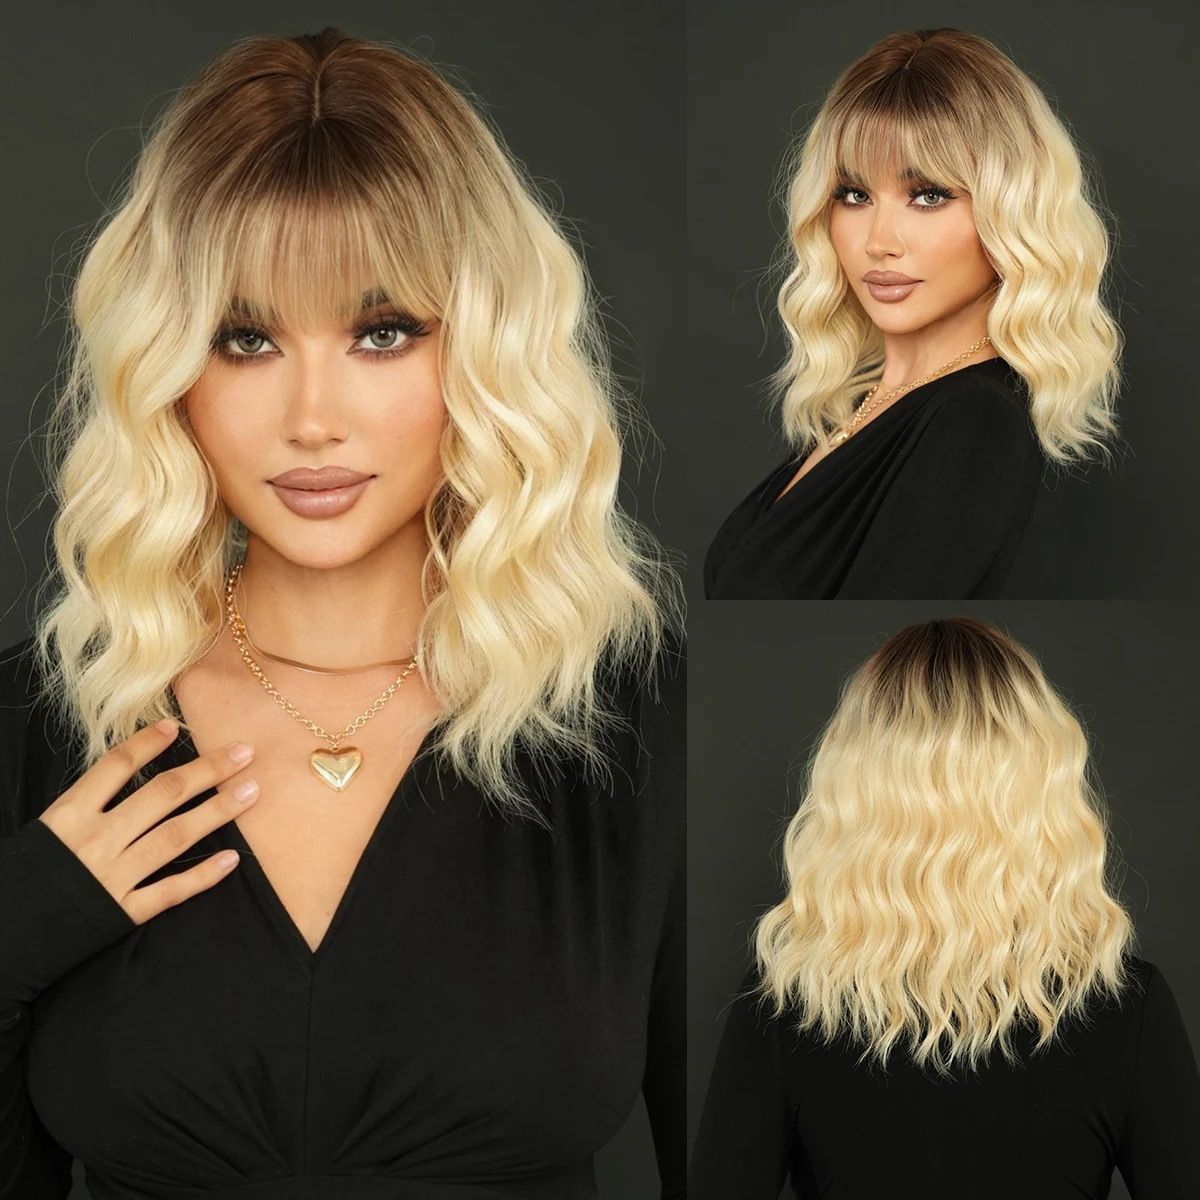 

NAMM Long Wavy Brown Ombre Light Blonde Wig With Dark Roots High Density Synthetic Layered Hair Wig with Bangs Heat Resistant